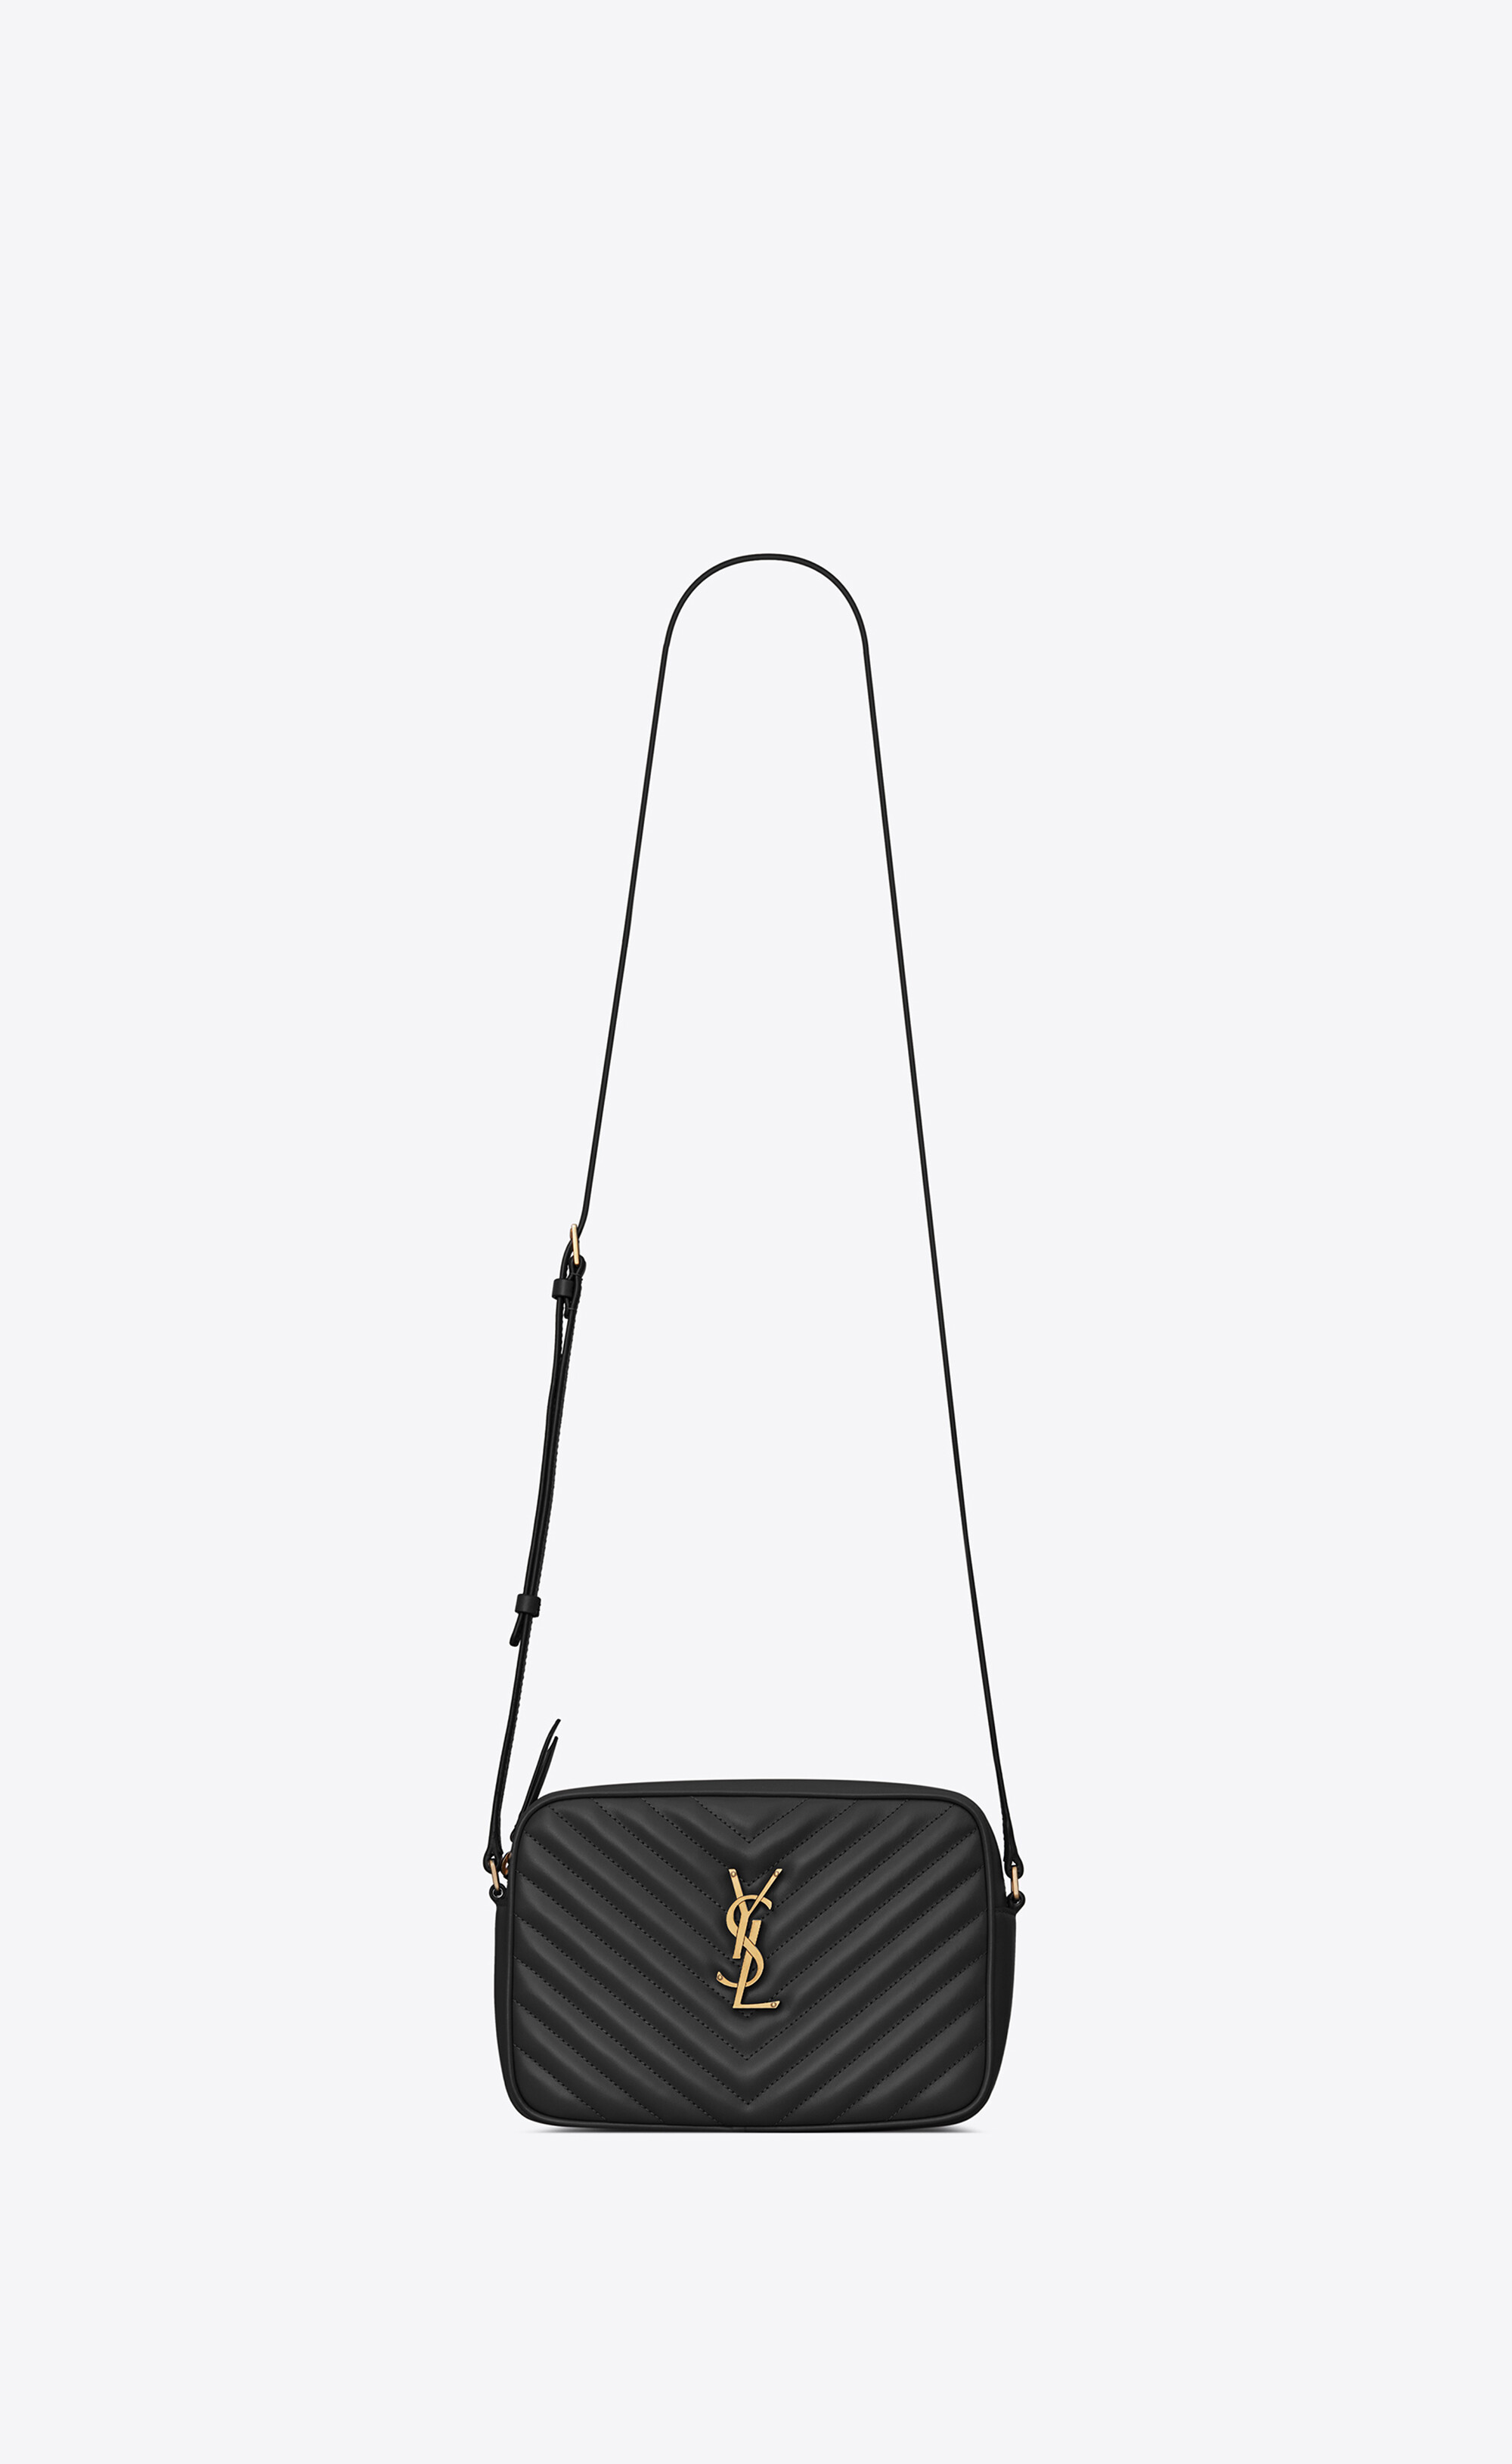 LOU camera bag in quilted leather | Saint Laurent | YSL.com